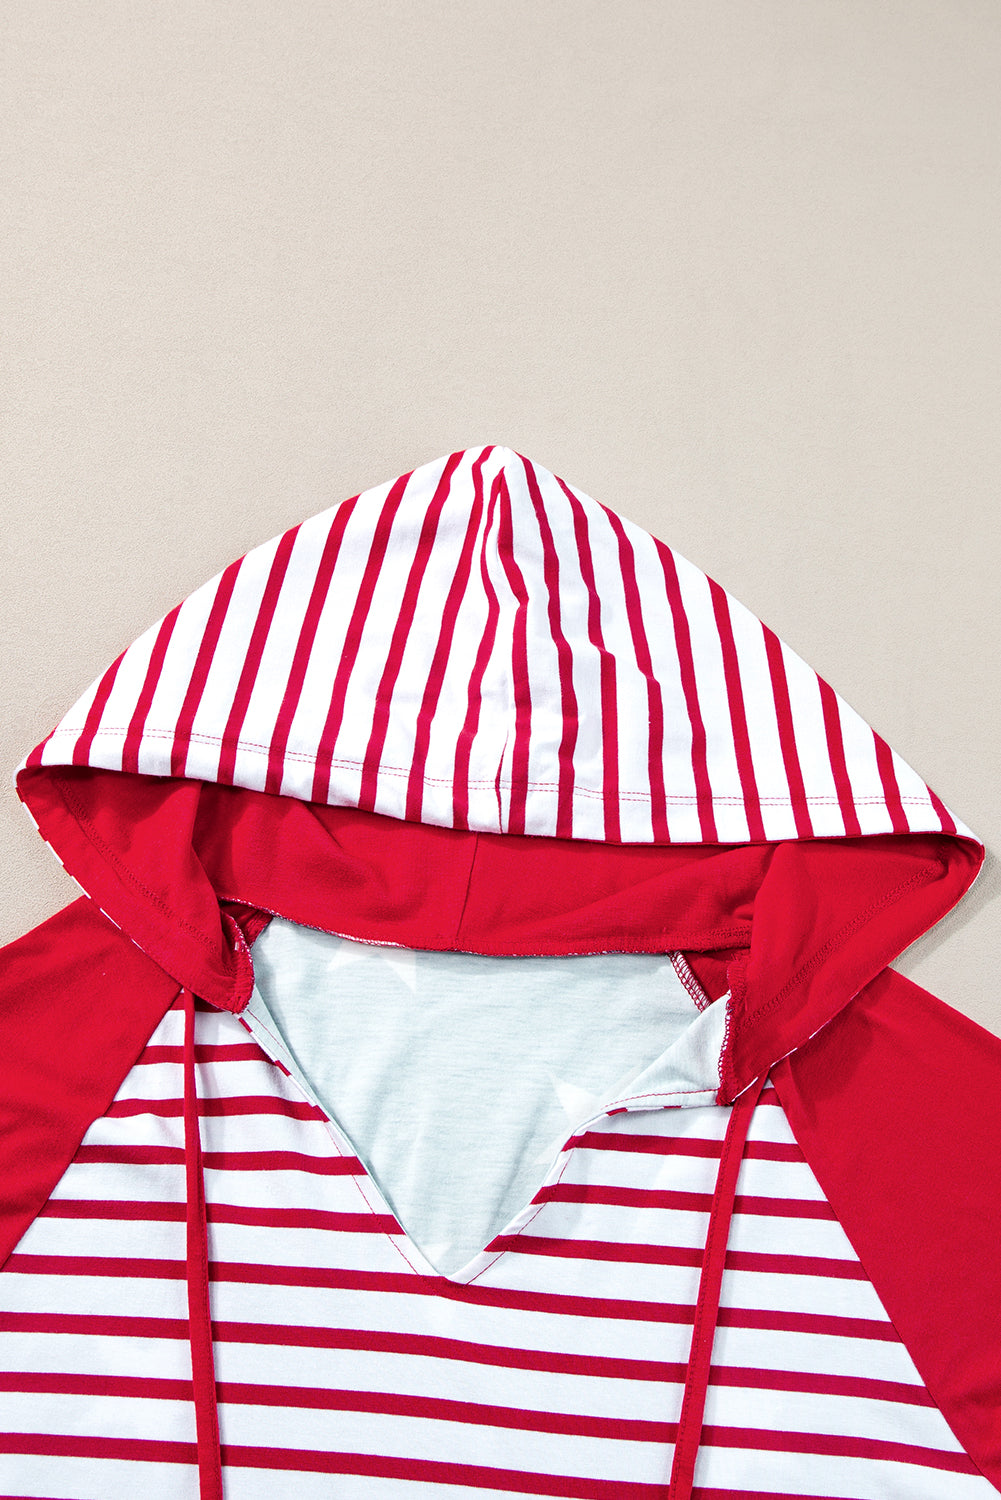 Stars and Stripes Hooded Tee